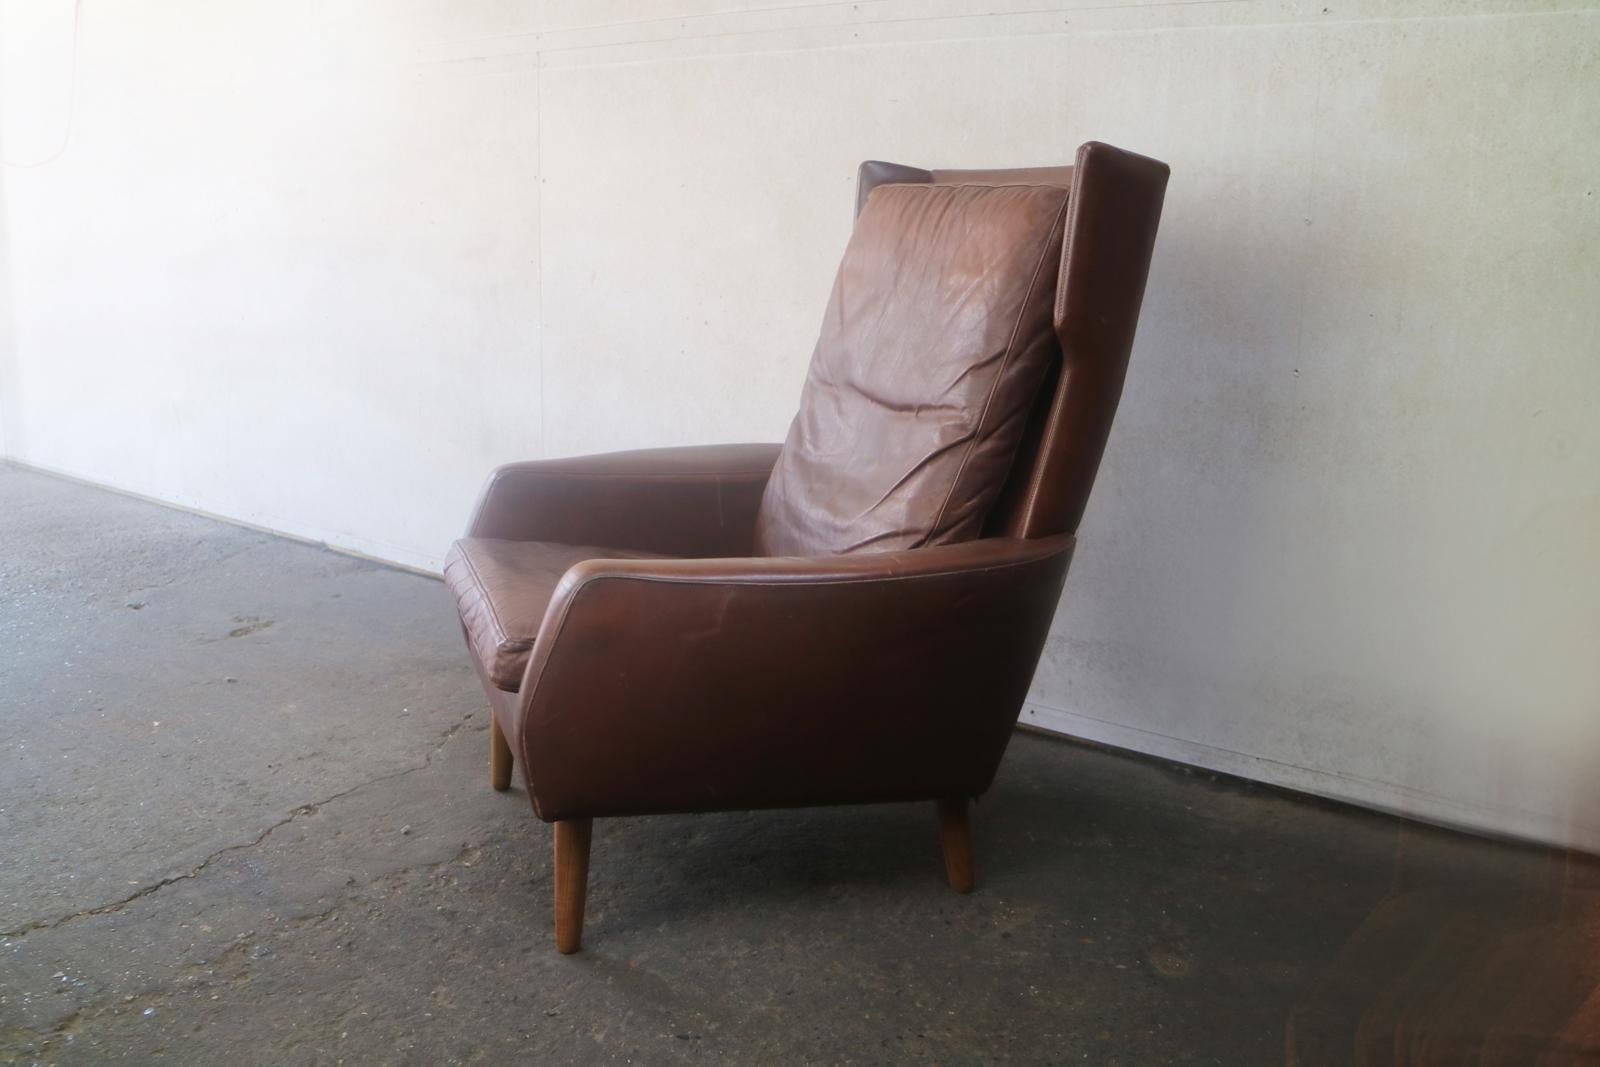 A Danish 1970s armchair, with the original brown leather upholstery. A very high back with side ’wings’ towards the top. Sits on turned teak legs.
   